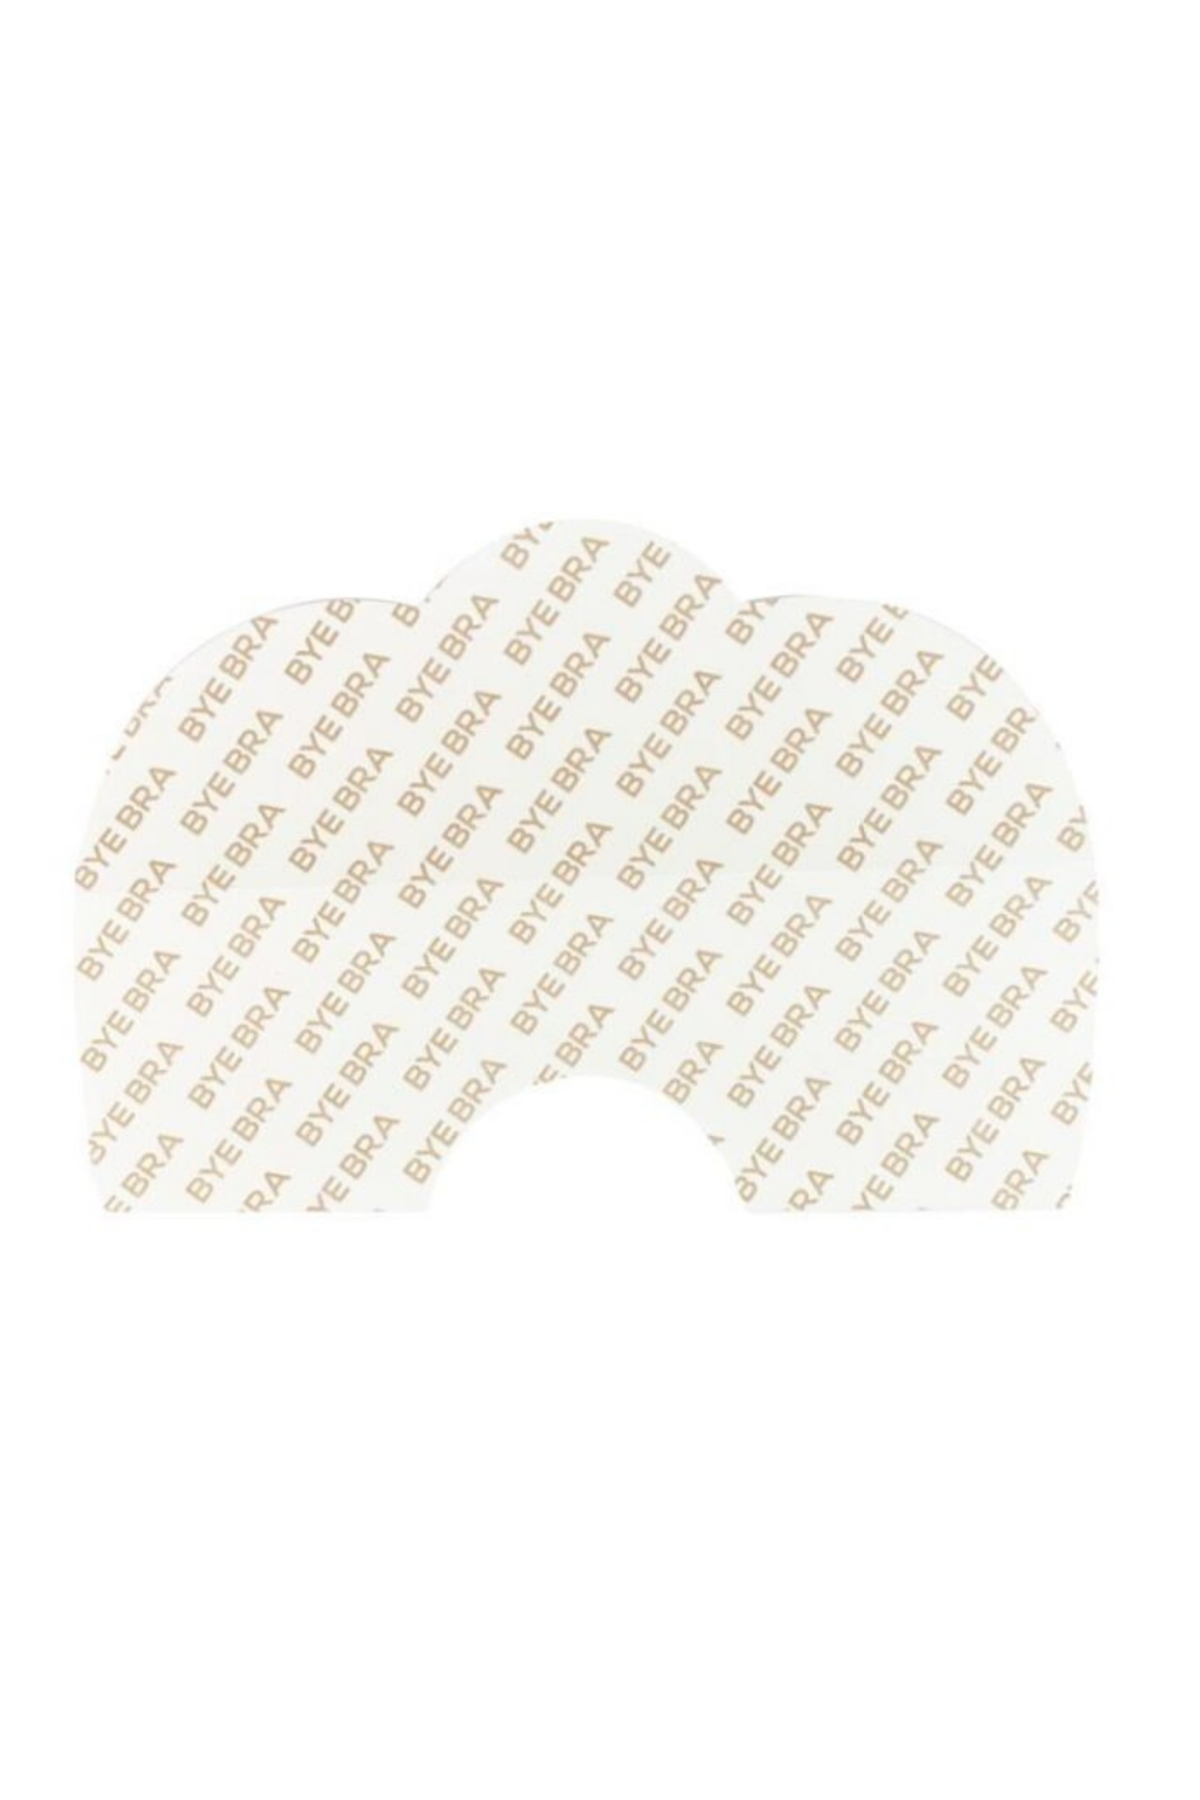 Buy Women Lift Up Invisible Bra Tape -2Pieces in Nigeria